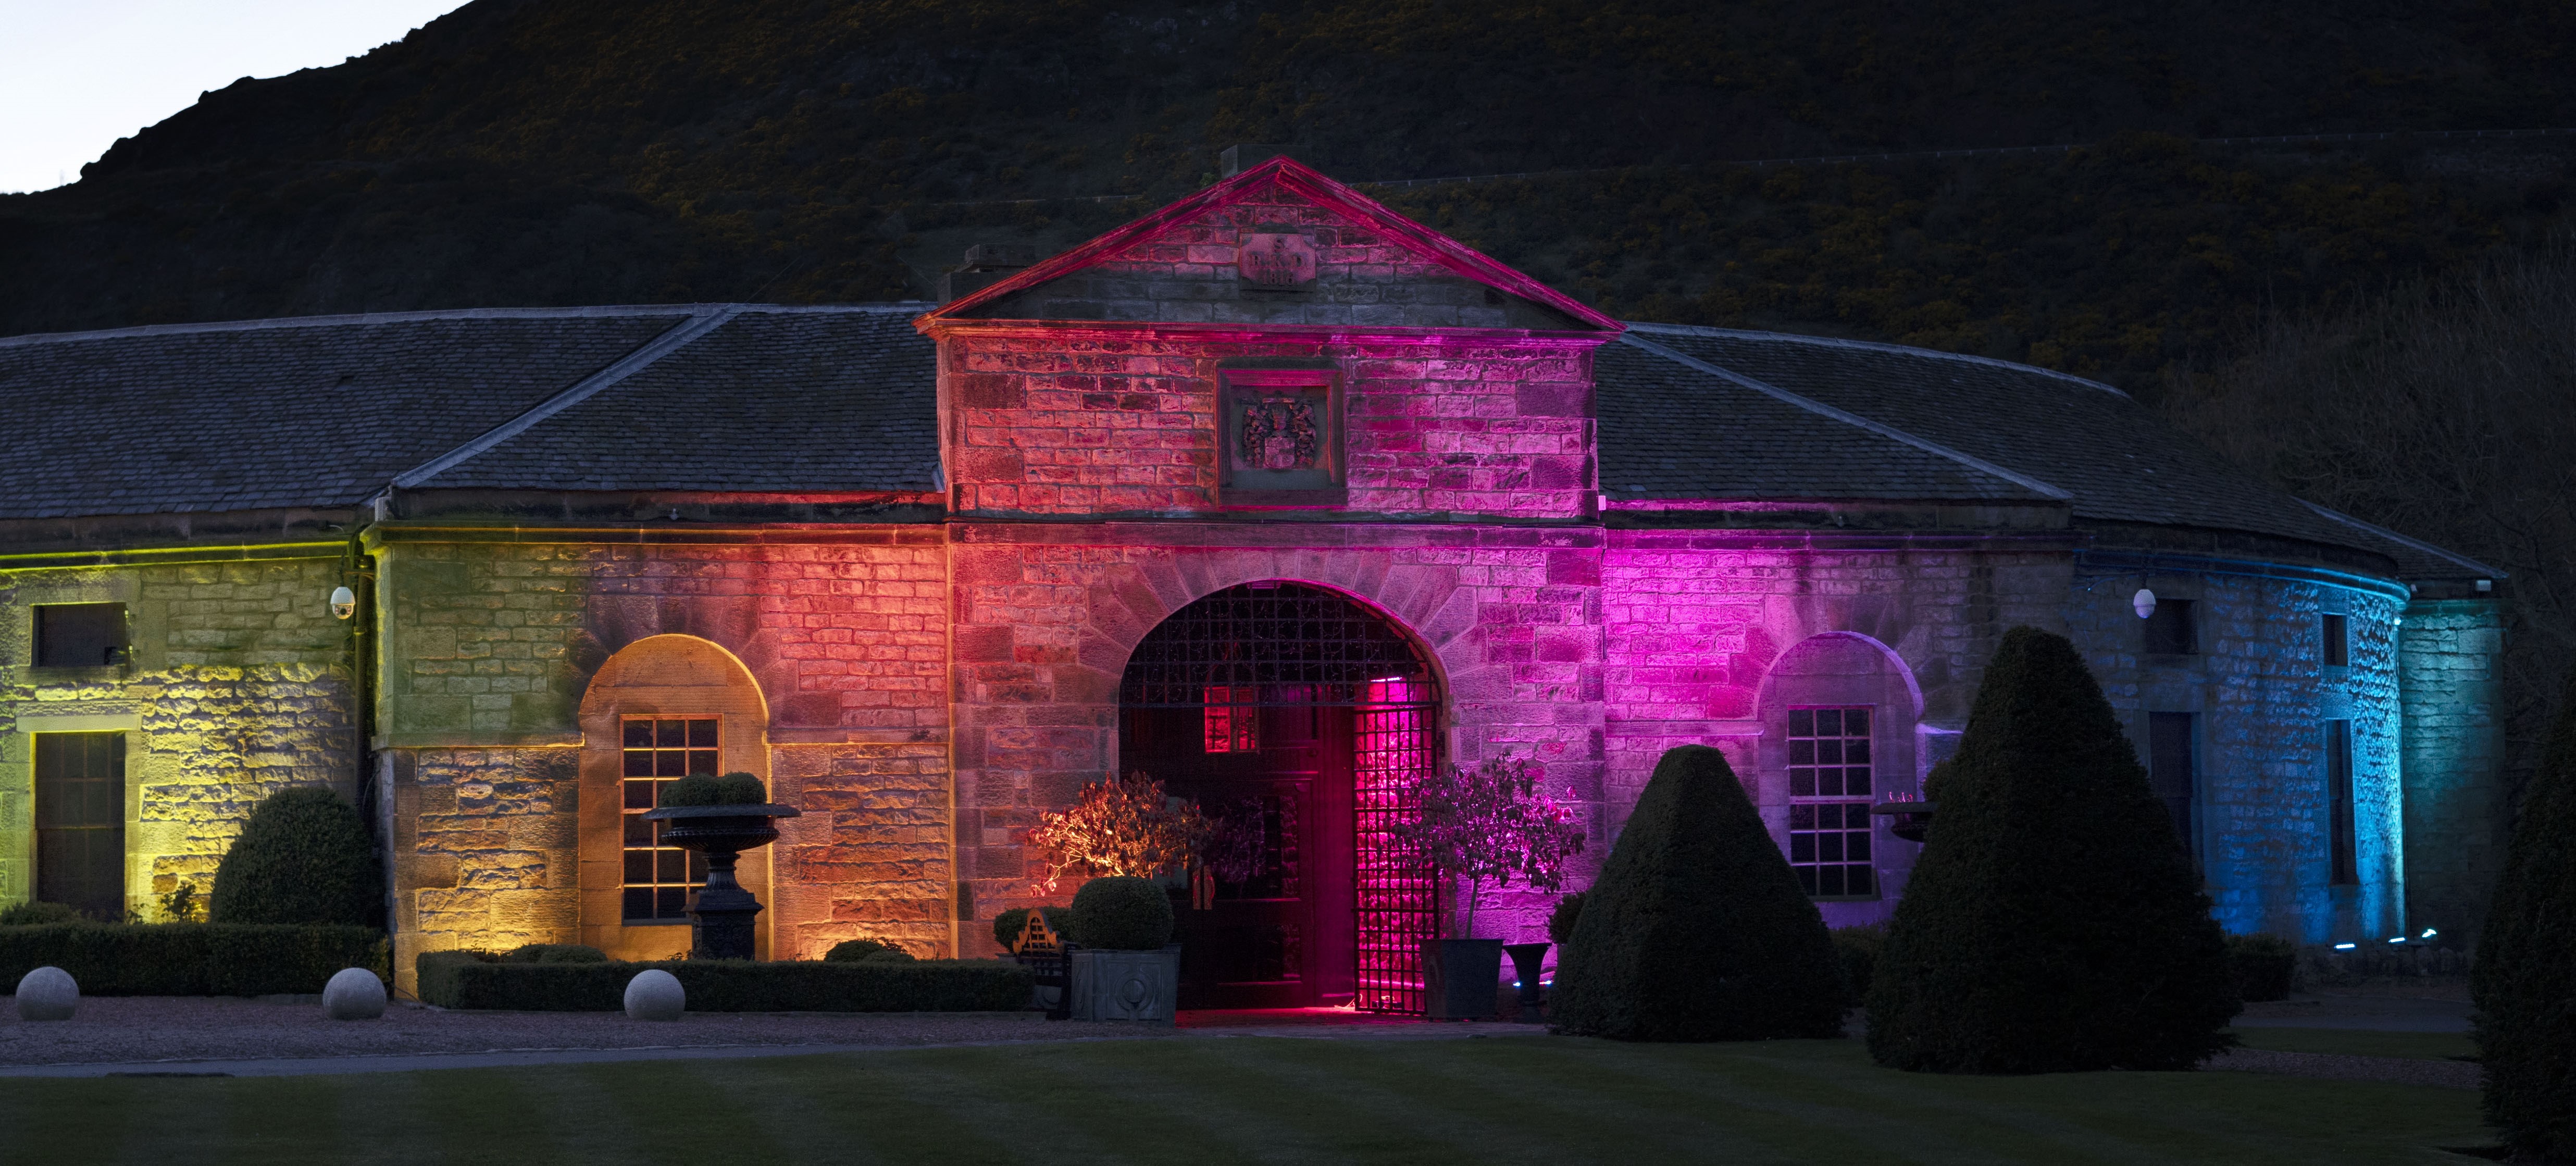 Events at Prestonfield